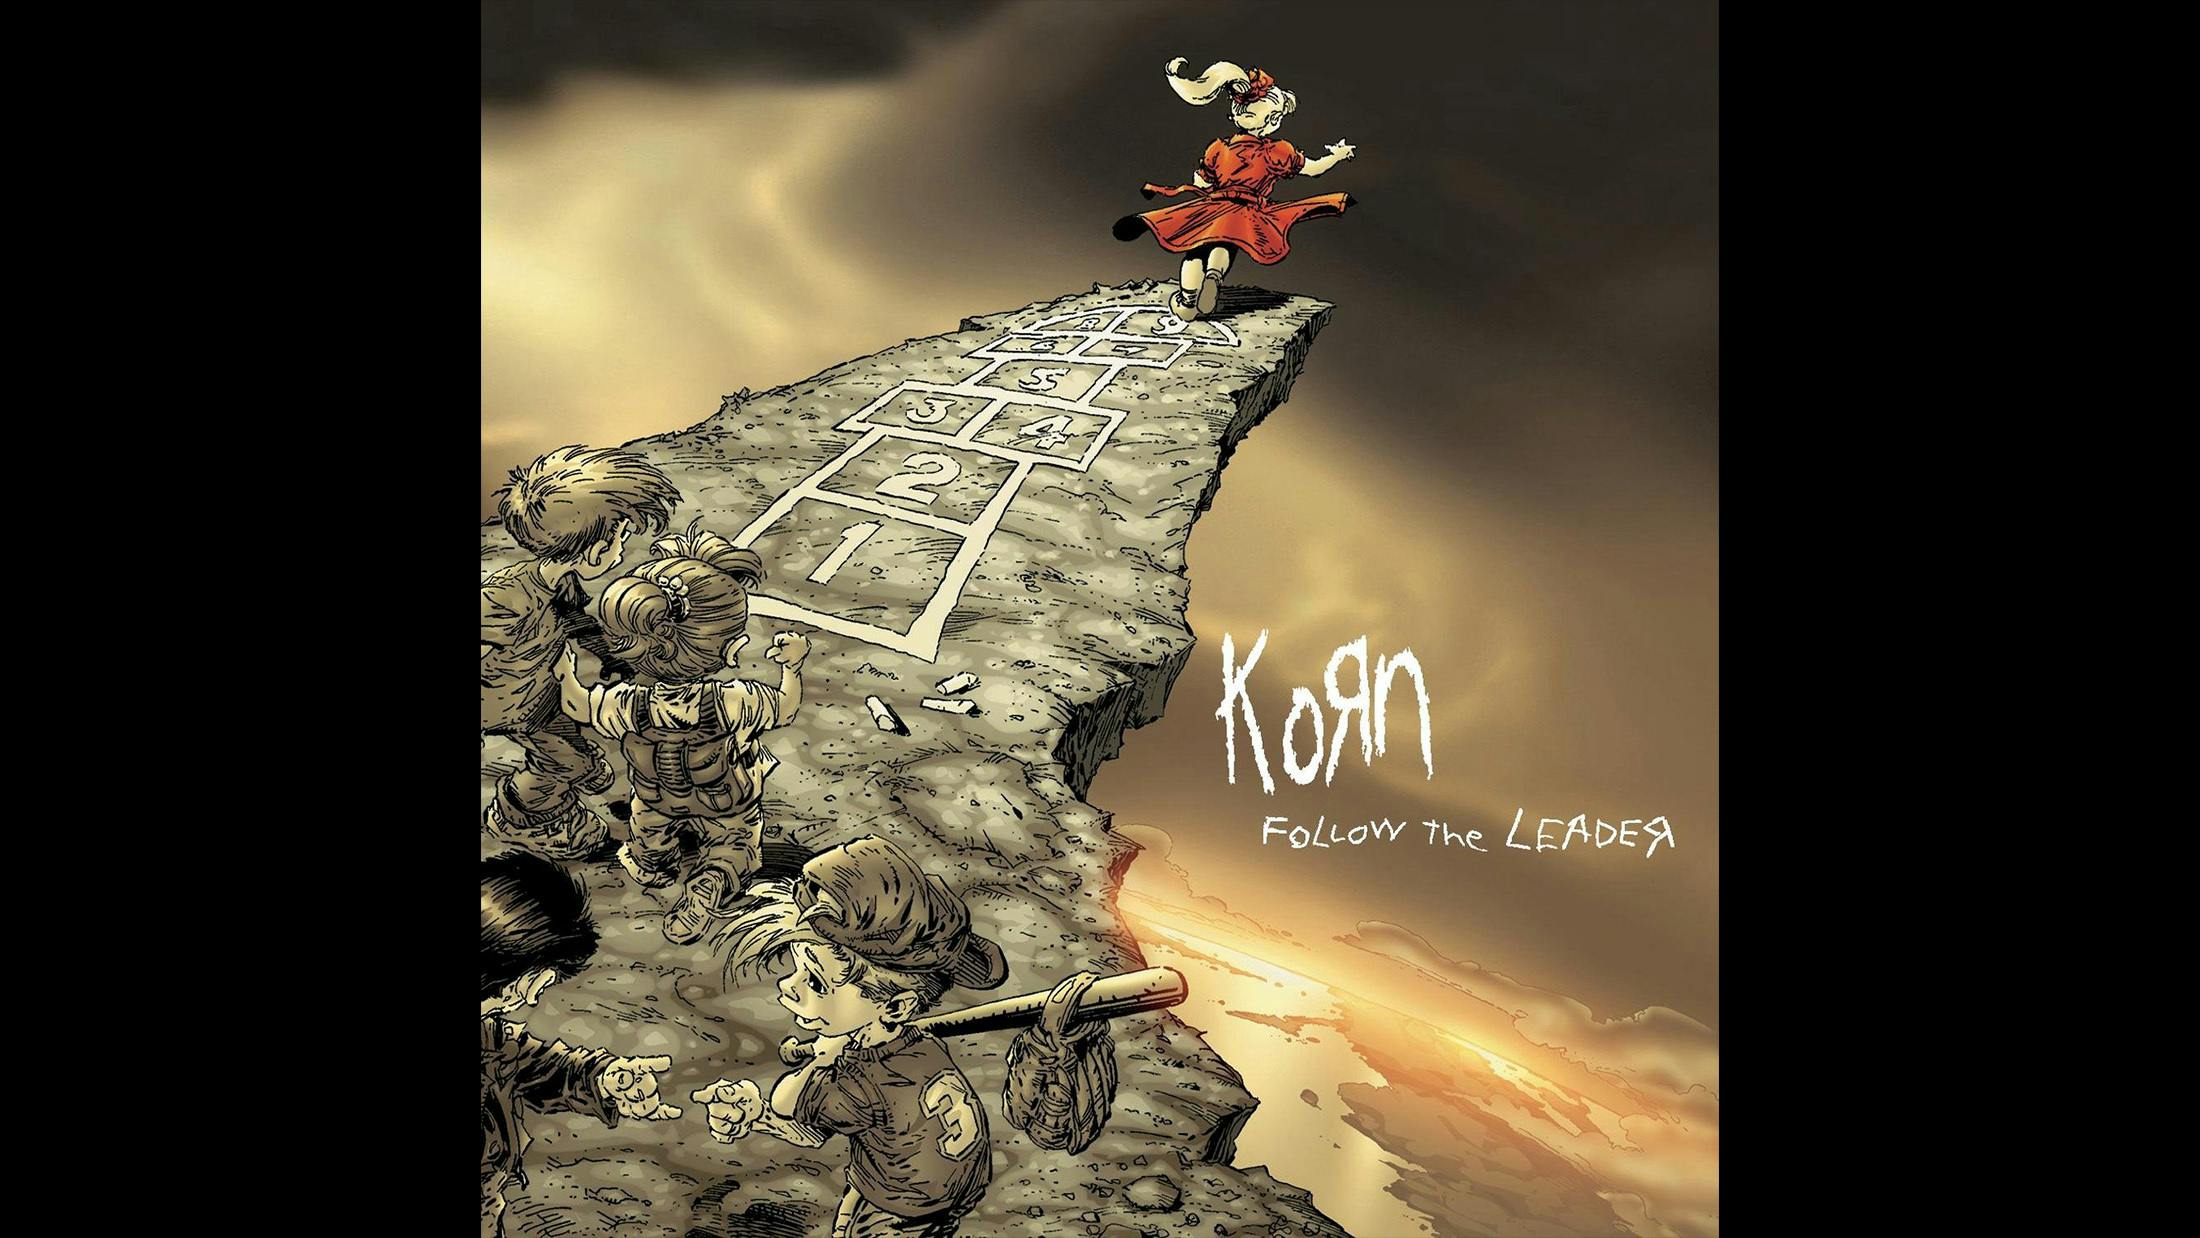 Though not Korn’s finest offering, celebrating Follow The Leader’s twentieth anniversary is a reminder of a time when Korn, and nu-metal, ruled the earth. Though the album was the first not to be produced by mentor Ross Robinson (the man responsible for their first two incendiary records), it yielded Got The Life and Freak On A Leash, two of the Bakersfield band’s biggest songs to date. And guess what? Despite the subsequent two decades featuring some low points for Korn, they’re back to being leaders again.